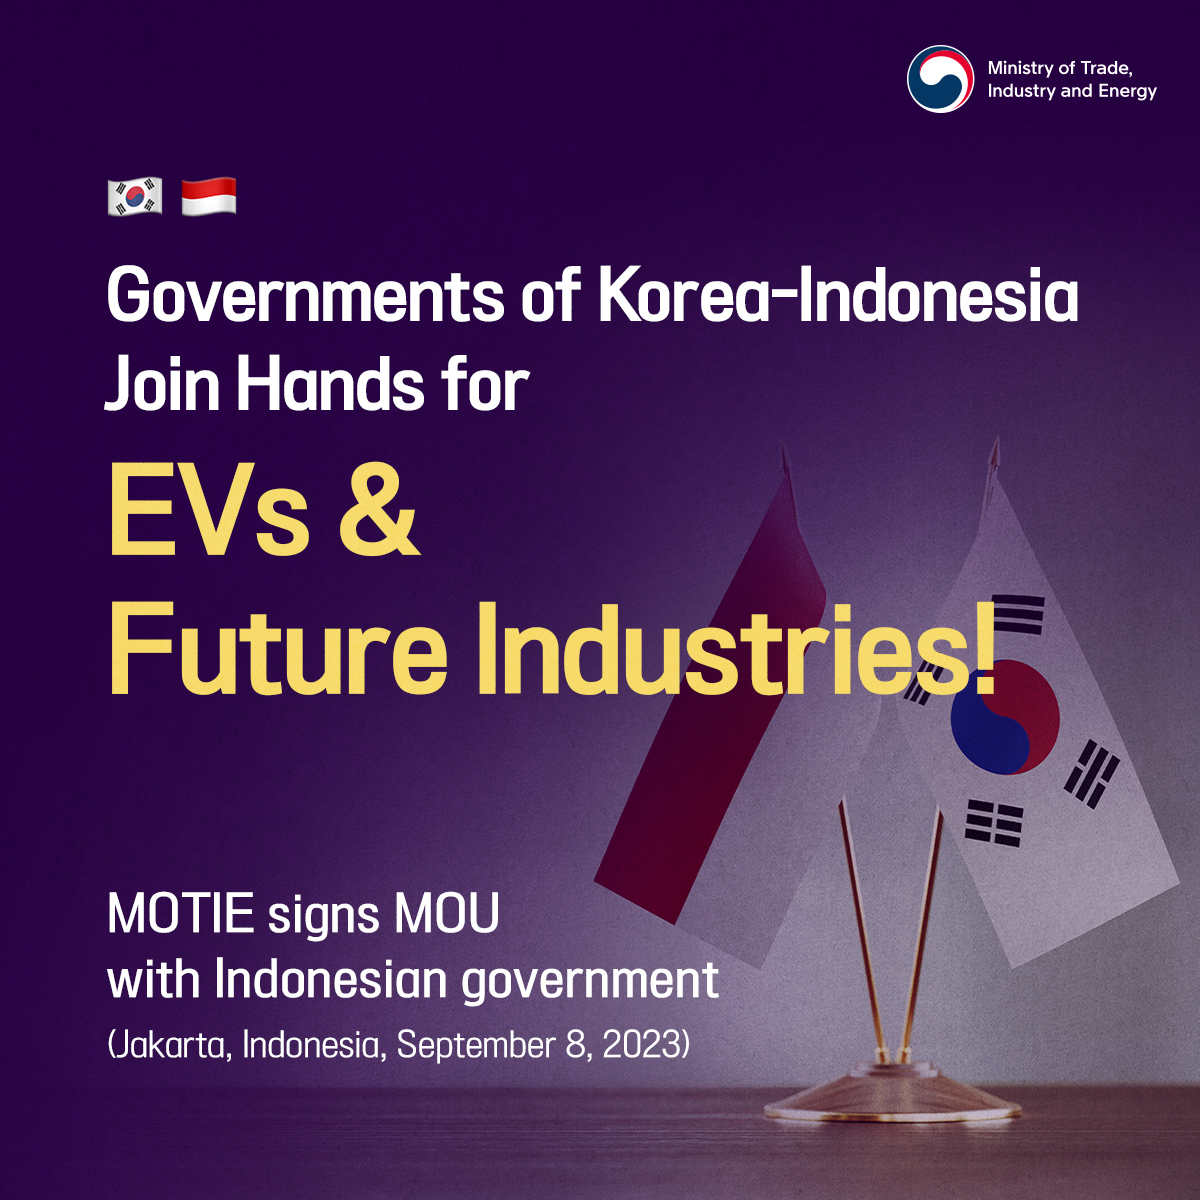 Korea and Indonesia join hands in EVs & Future Industries Image 0